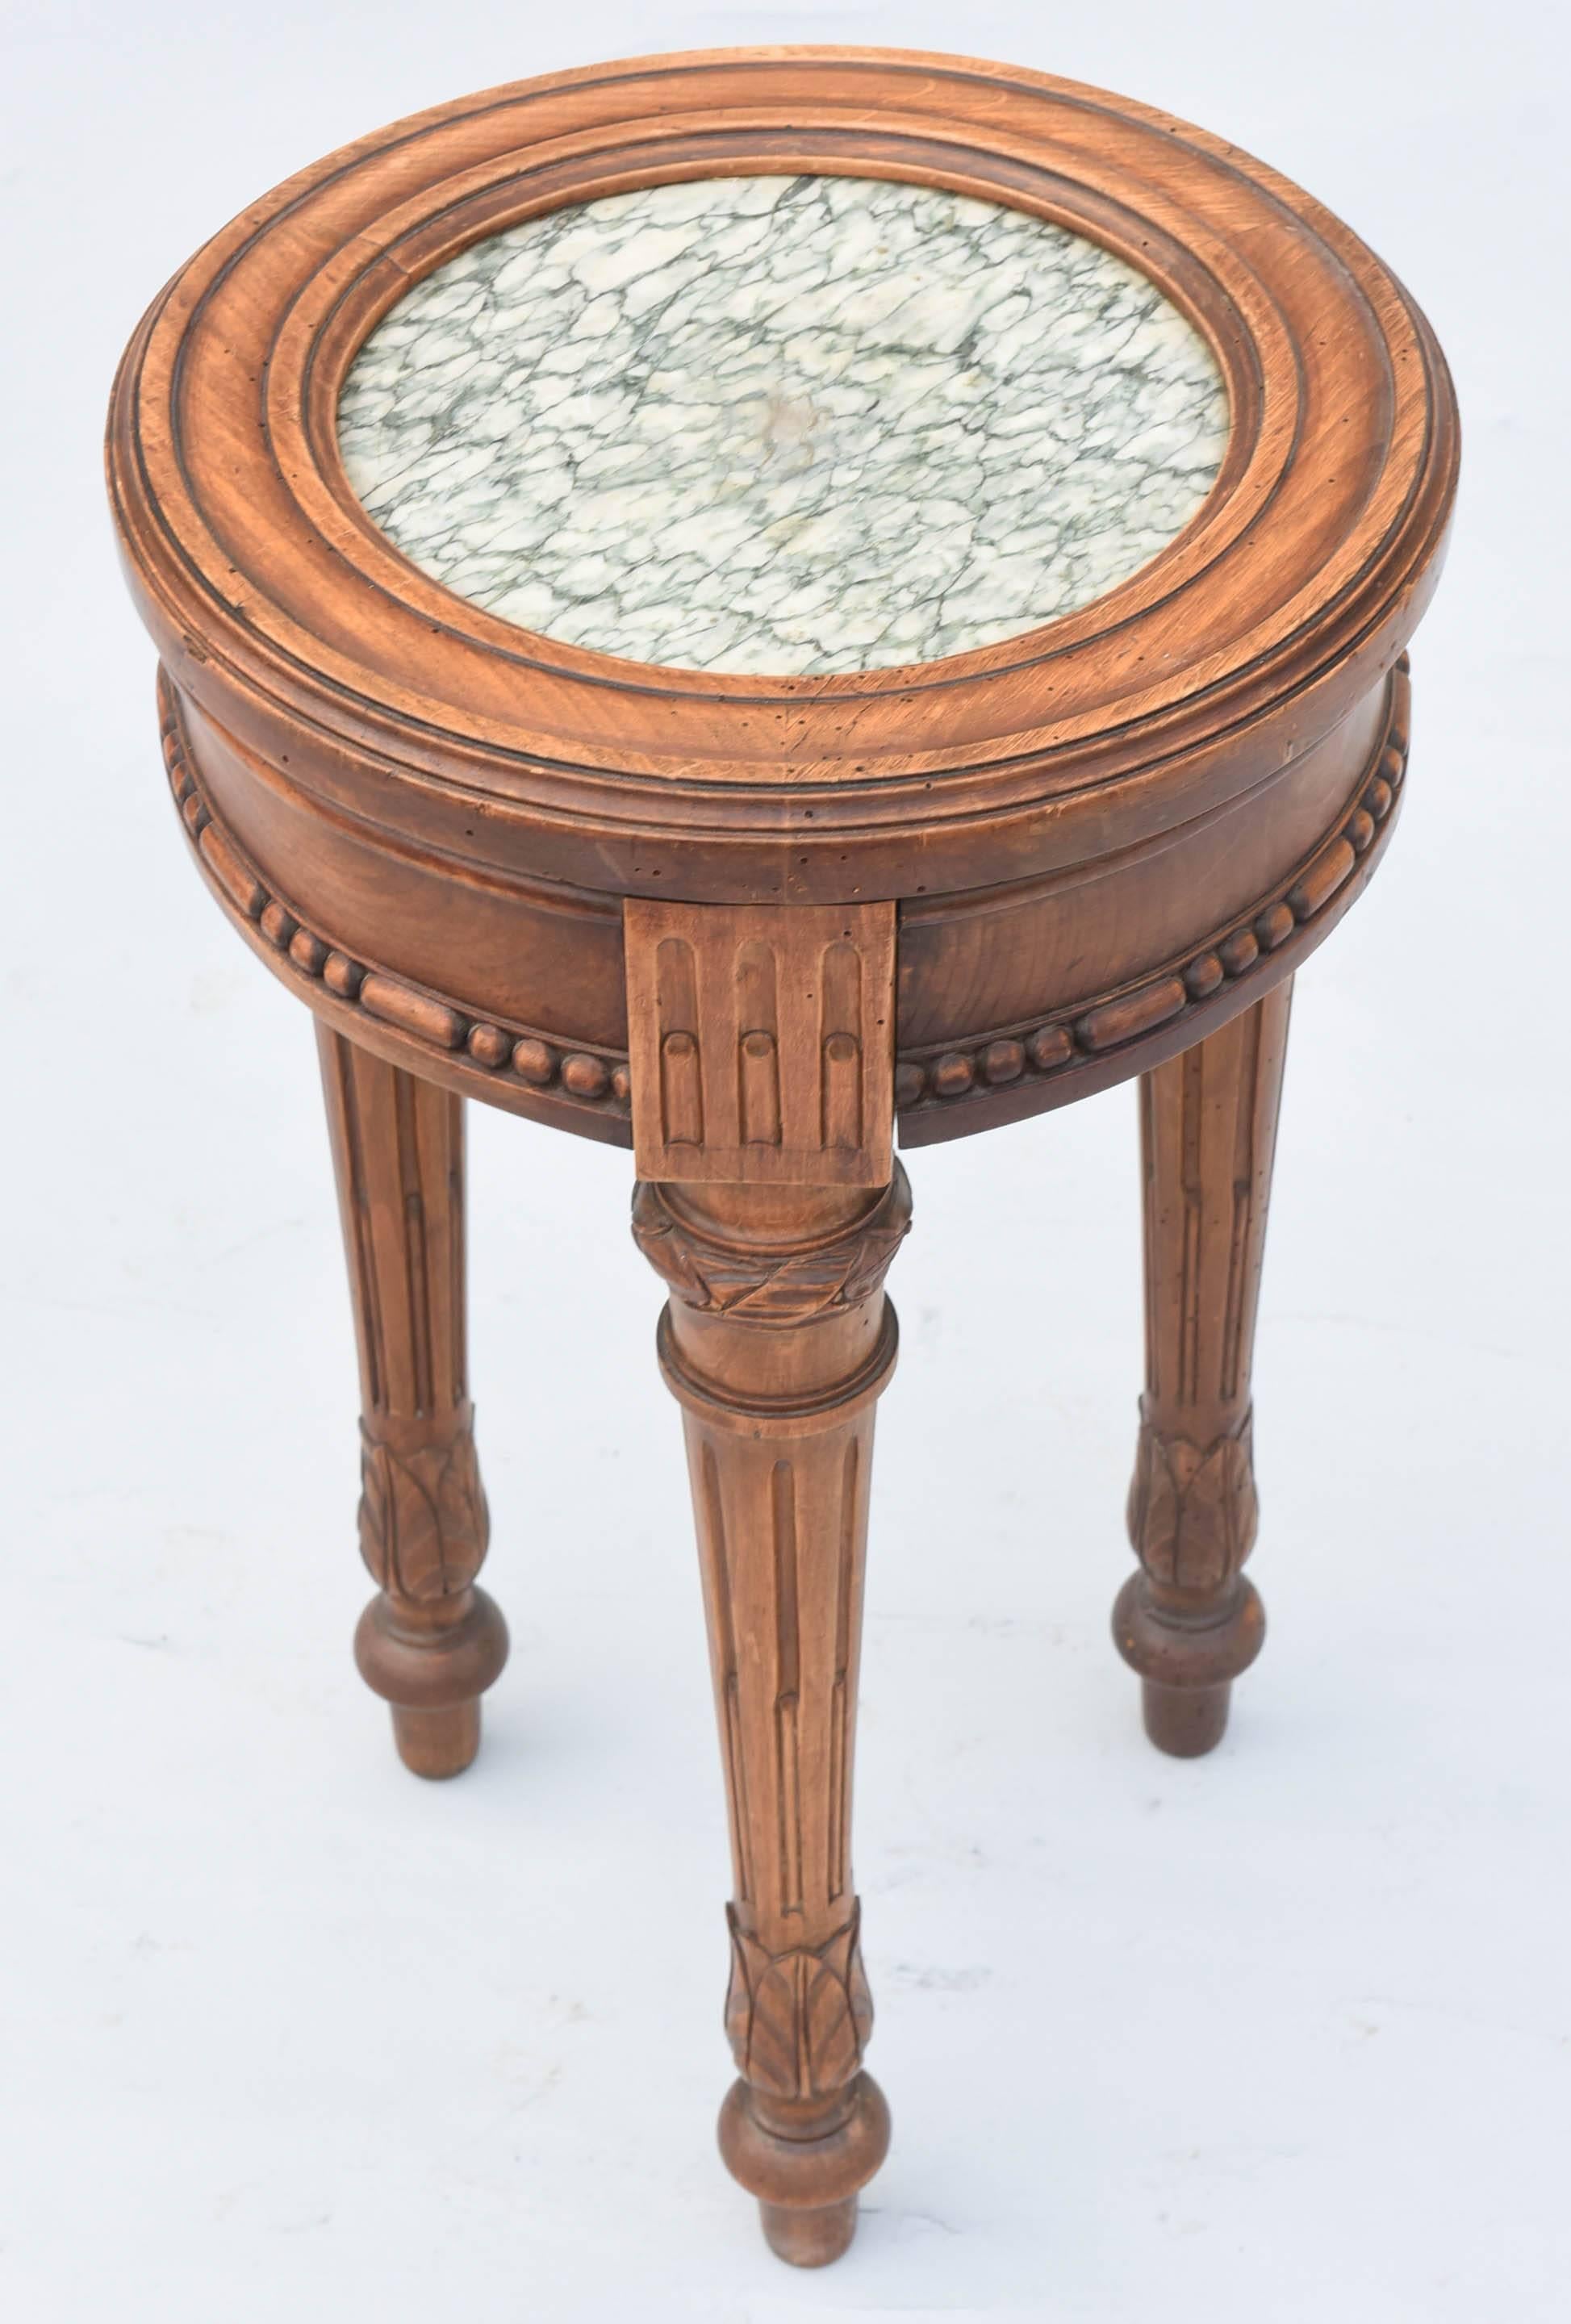 Italian Well-carved Walnut 19th Century Accent Table with Marble Top